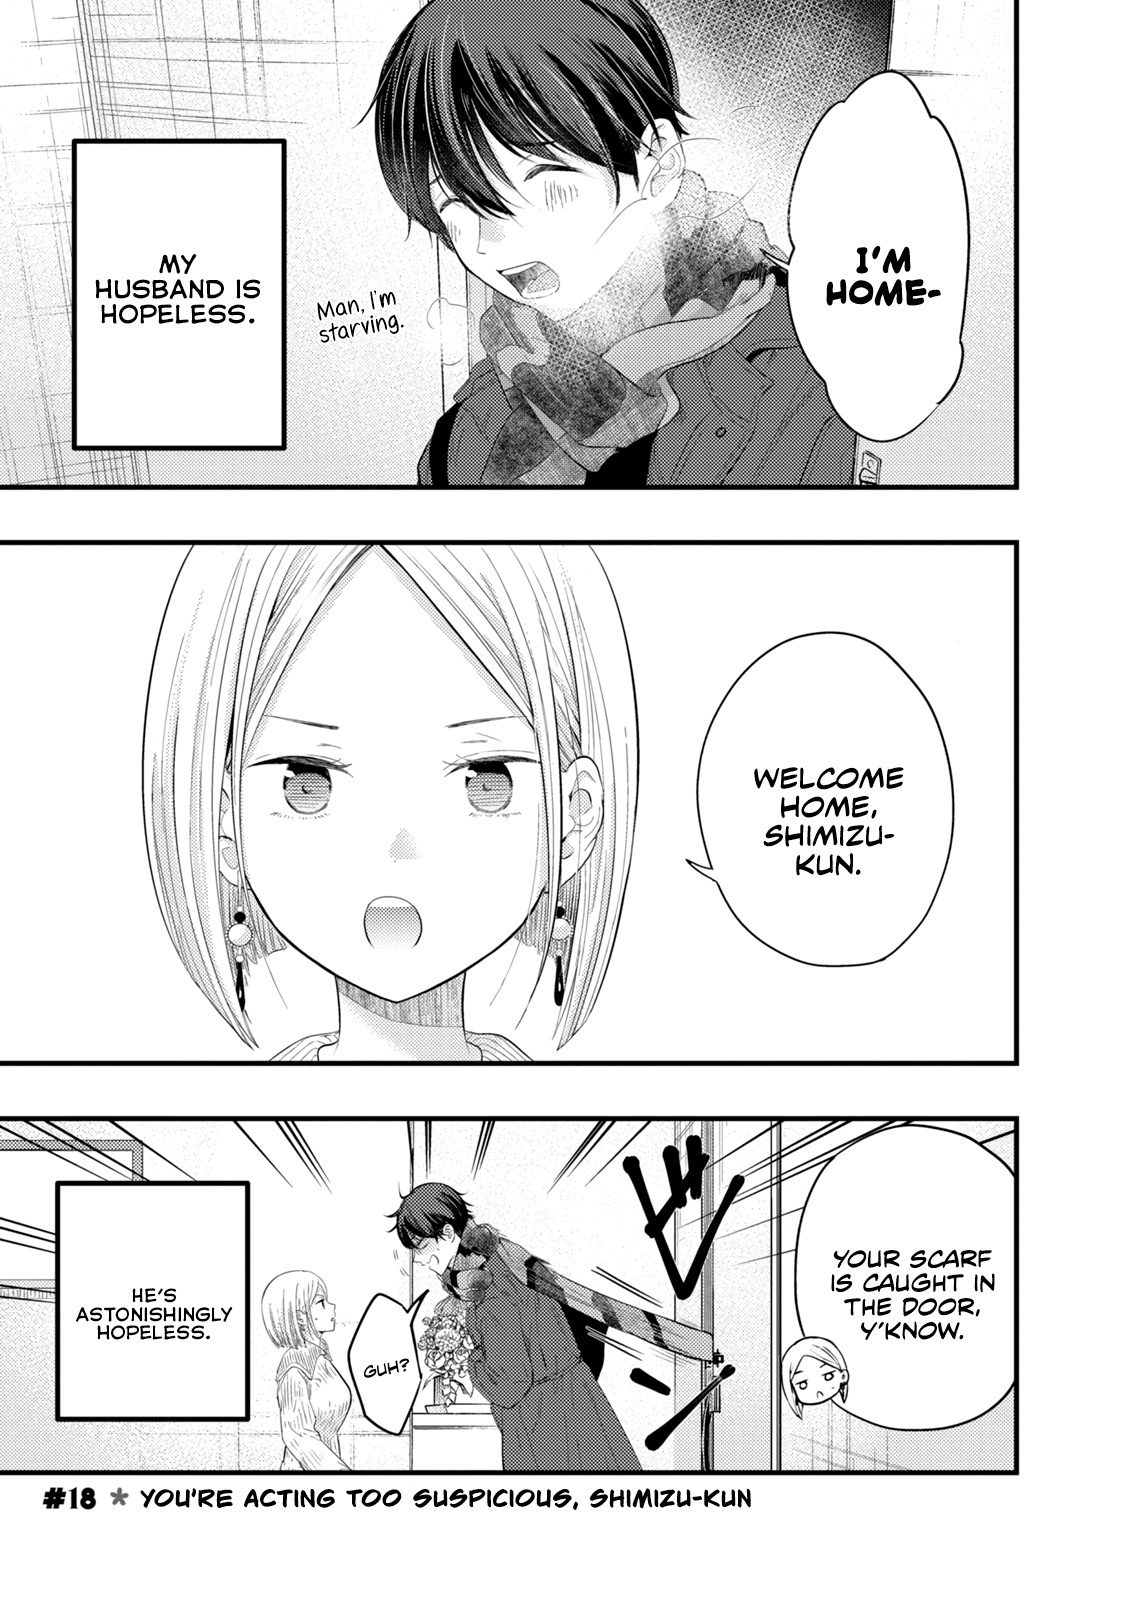 My Wife Is A Little Scary (Serialization) Vol.3 Chapter 18: You're Acting Too Suspicious, Shimizu-Kun - Picture 1